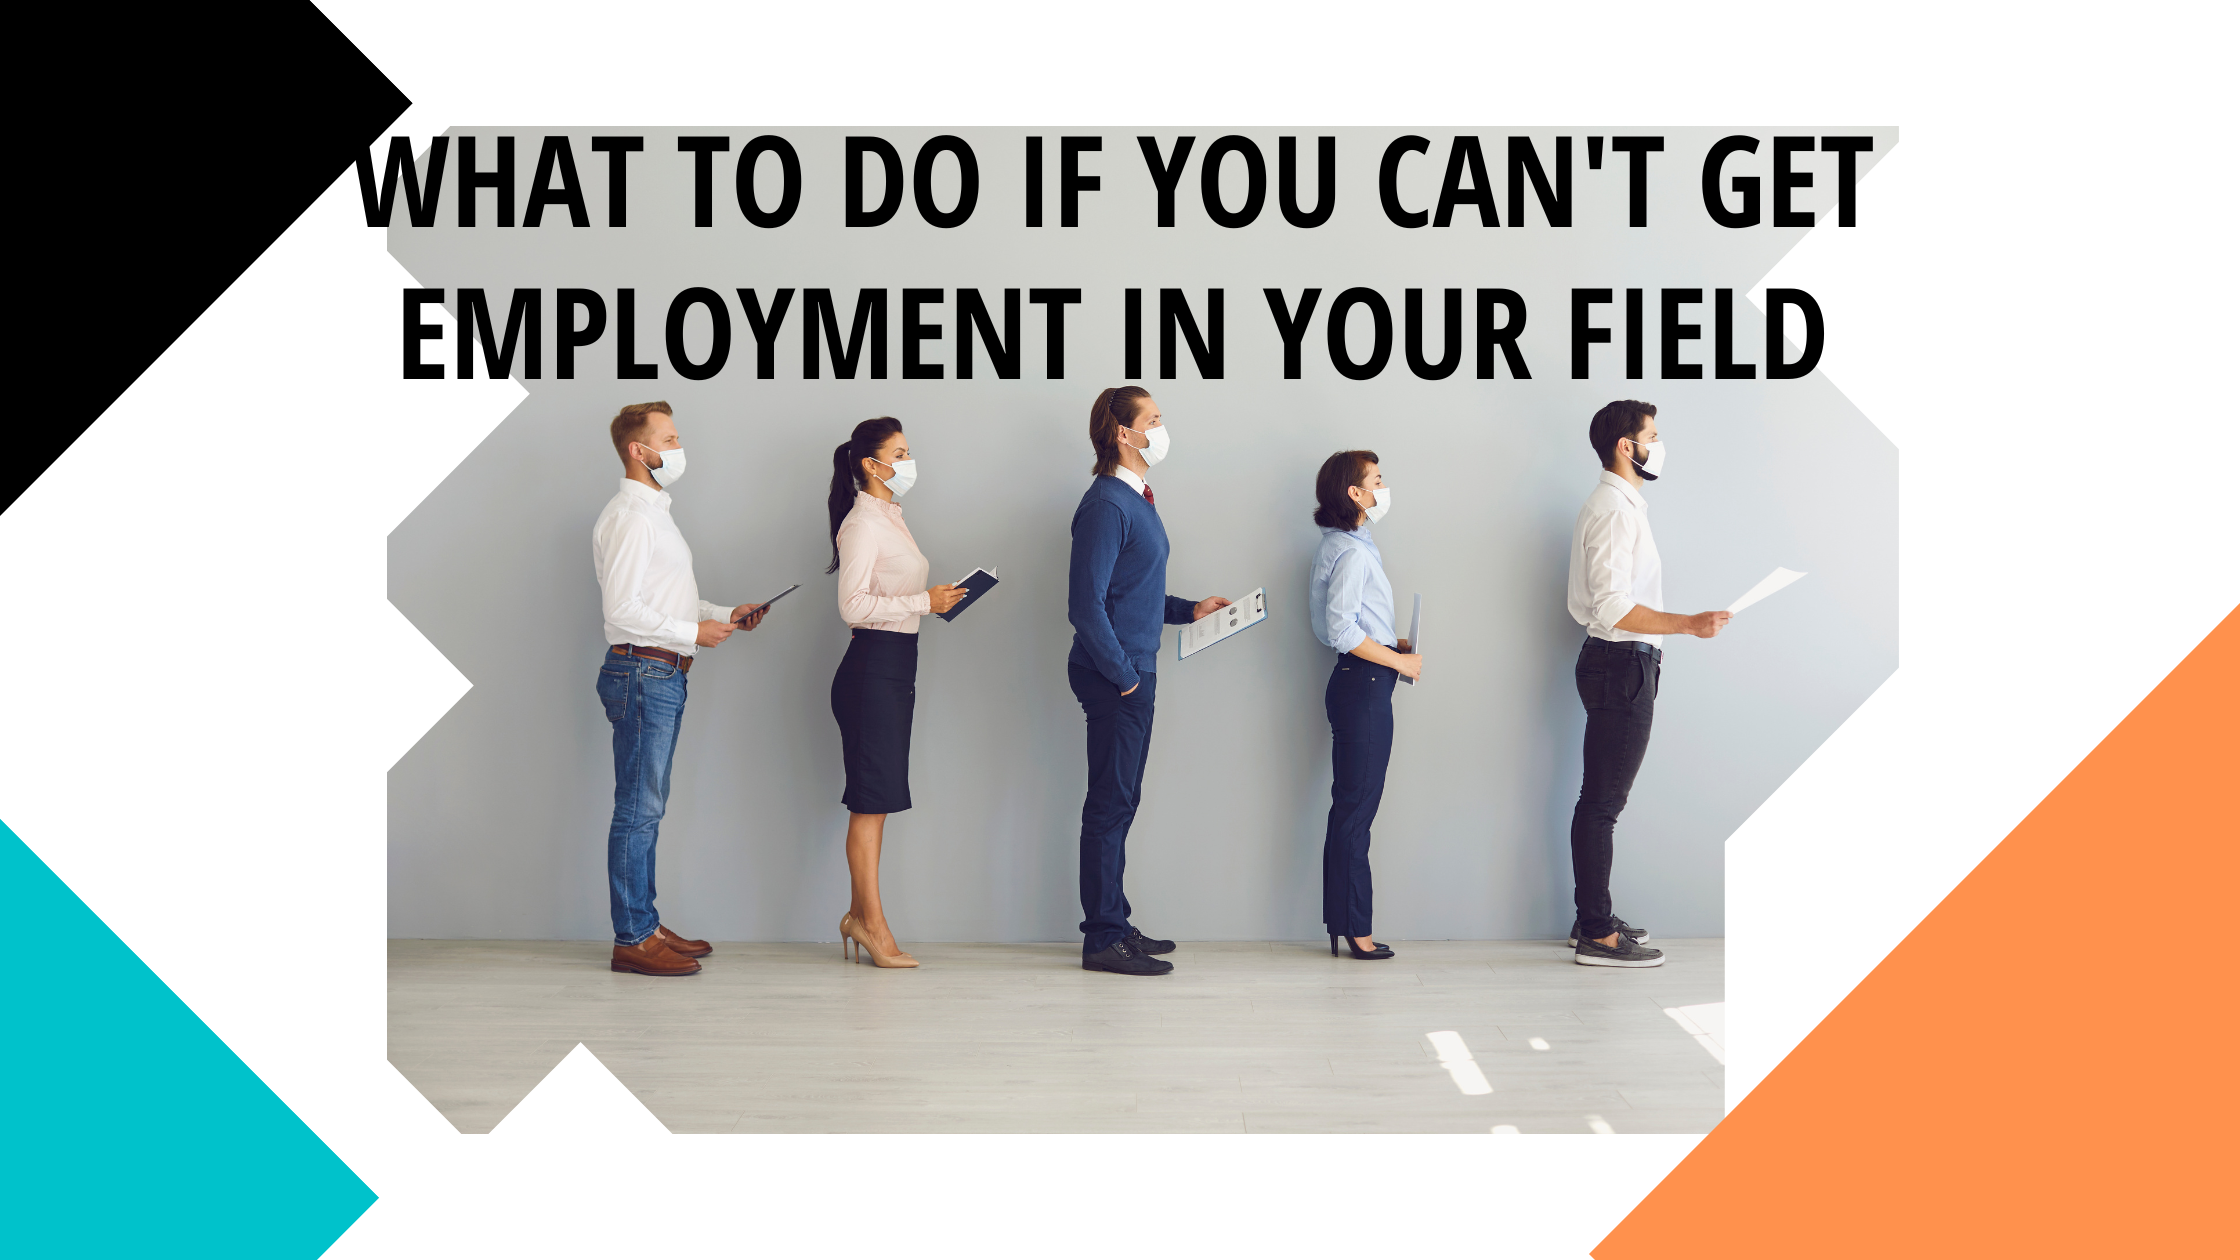 What To Do If You Can’t Get Employment In Your Field